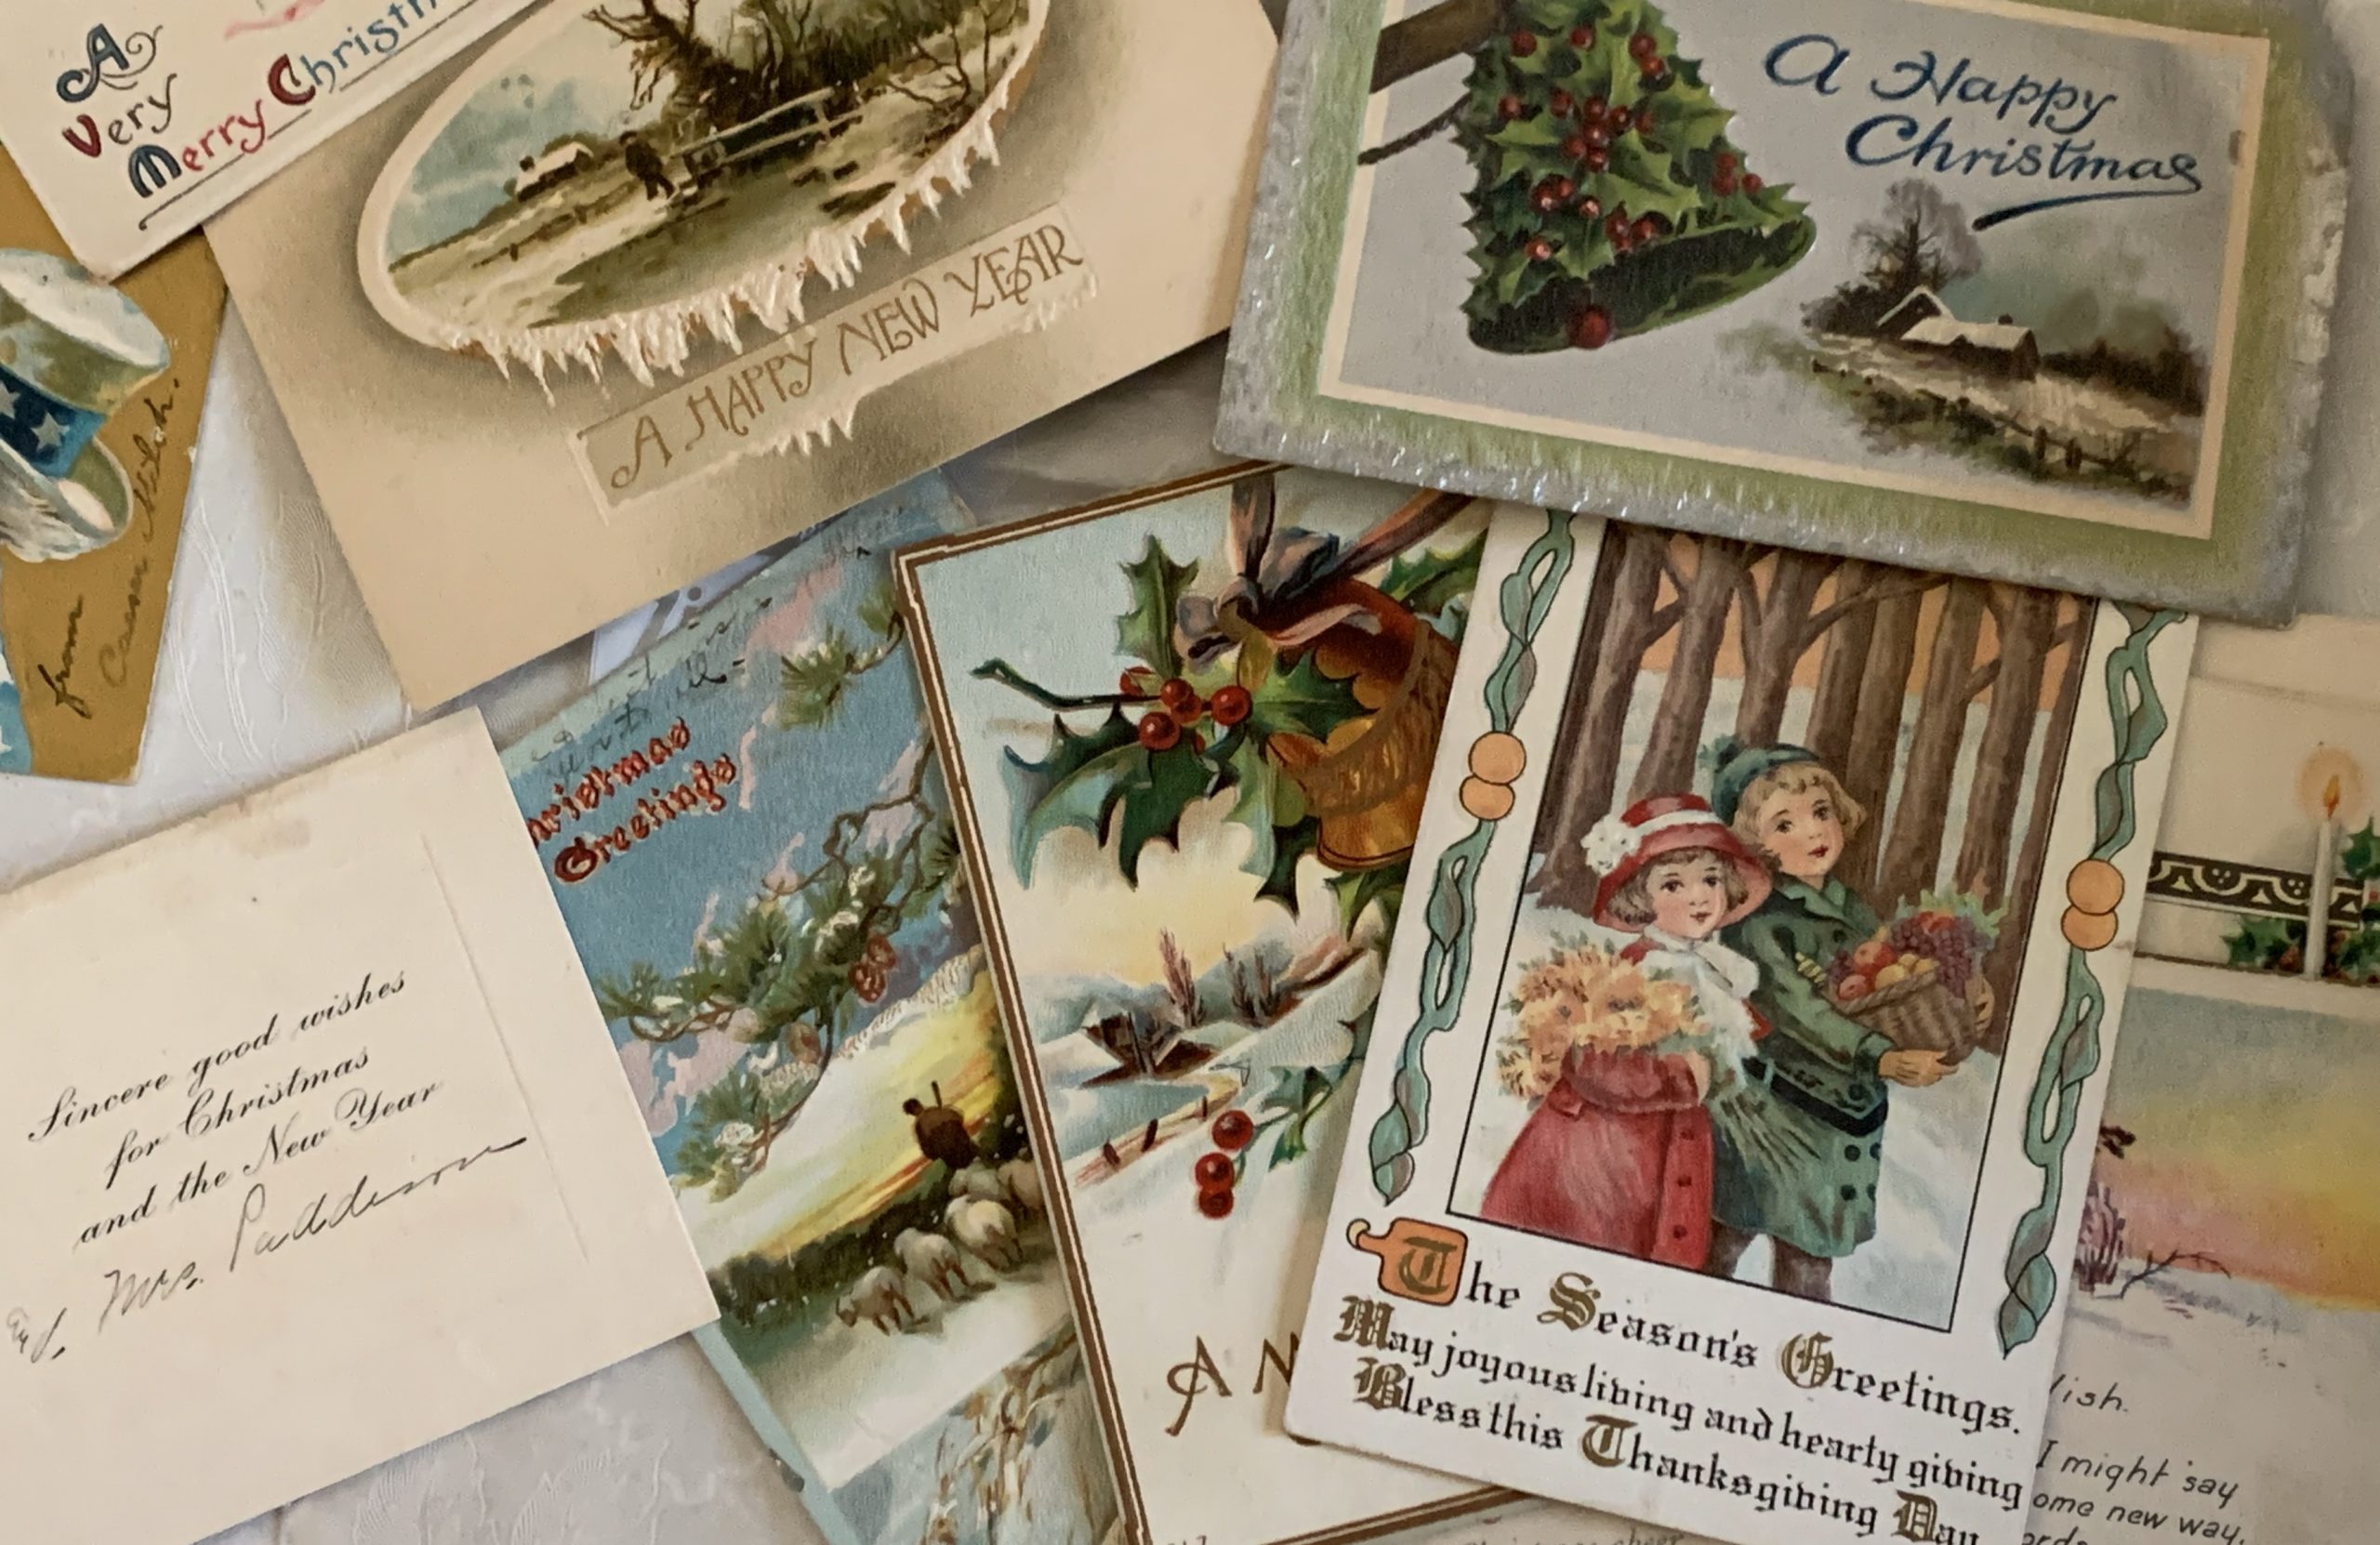 Some of the Christmas cards sent to the Körner family in the early 20th century.